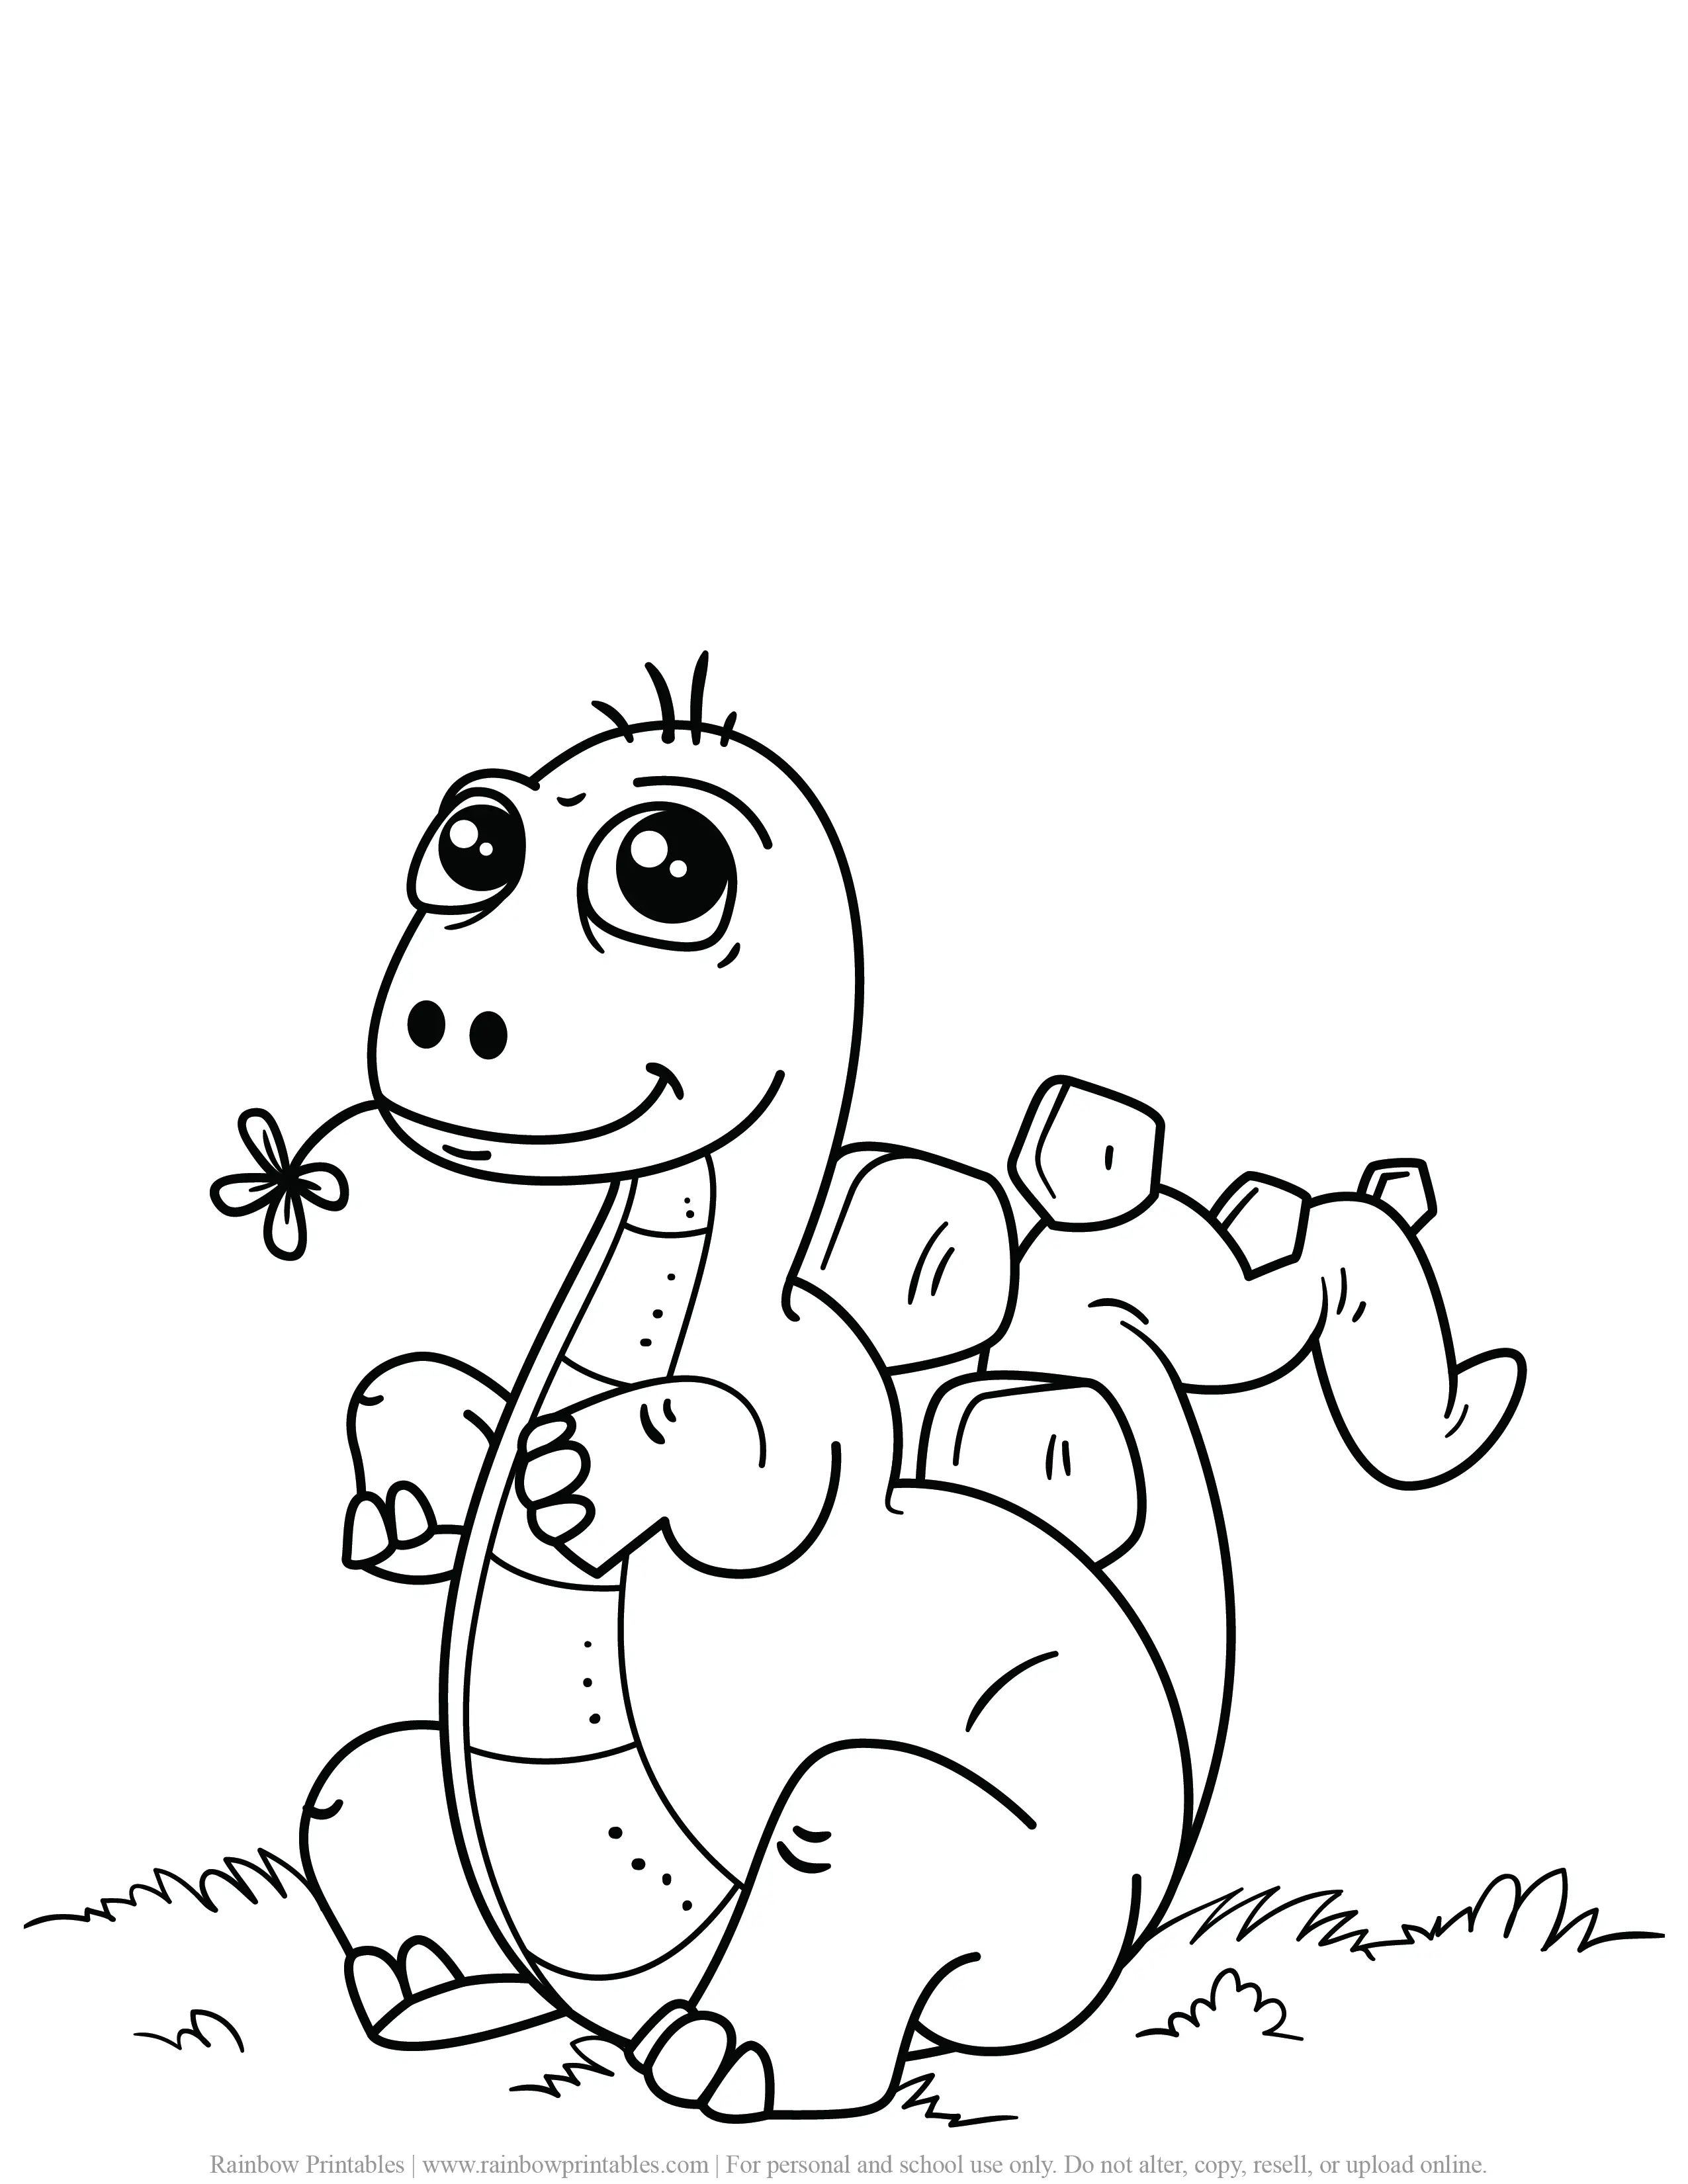 FREE DINOSAUR COLORING PAGES ACTIVITY FOR KIDS AND BOYS DINO DRAGON PRINTABLE-05